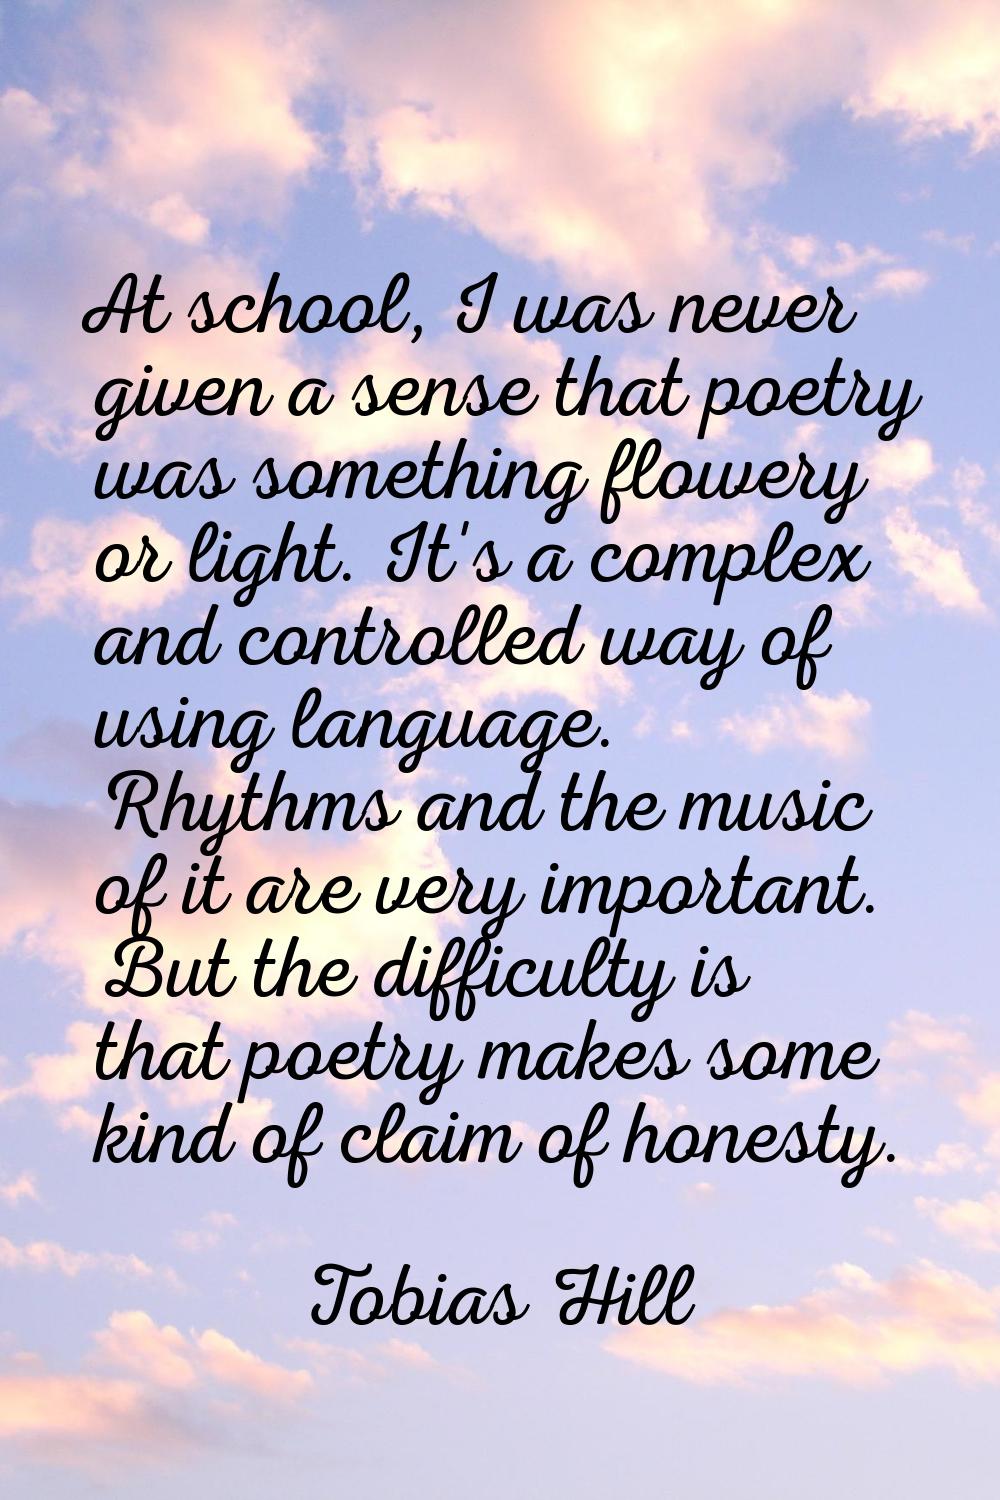 At school, I was never given a sense that poetry was something flowery or light. It's a complex and